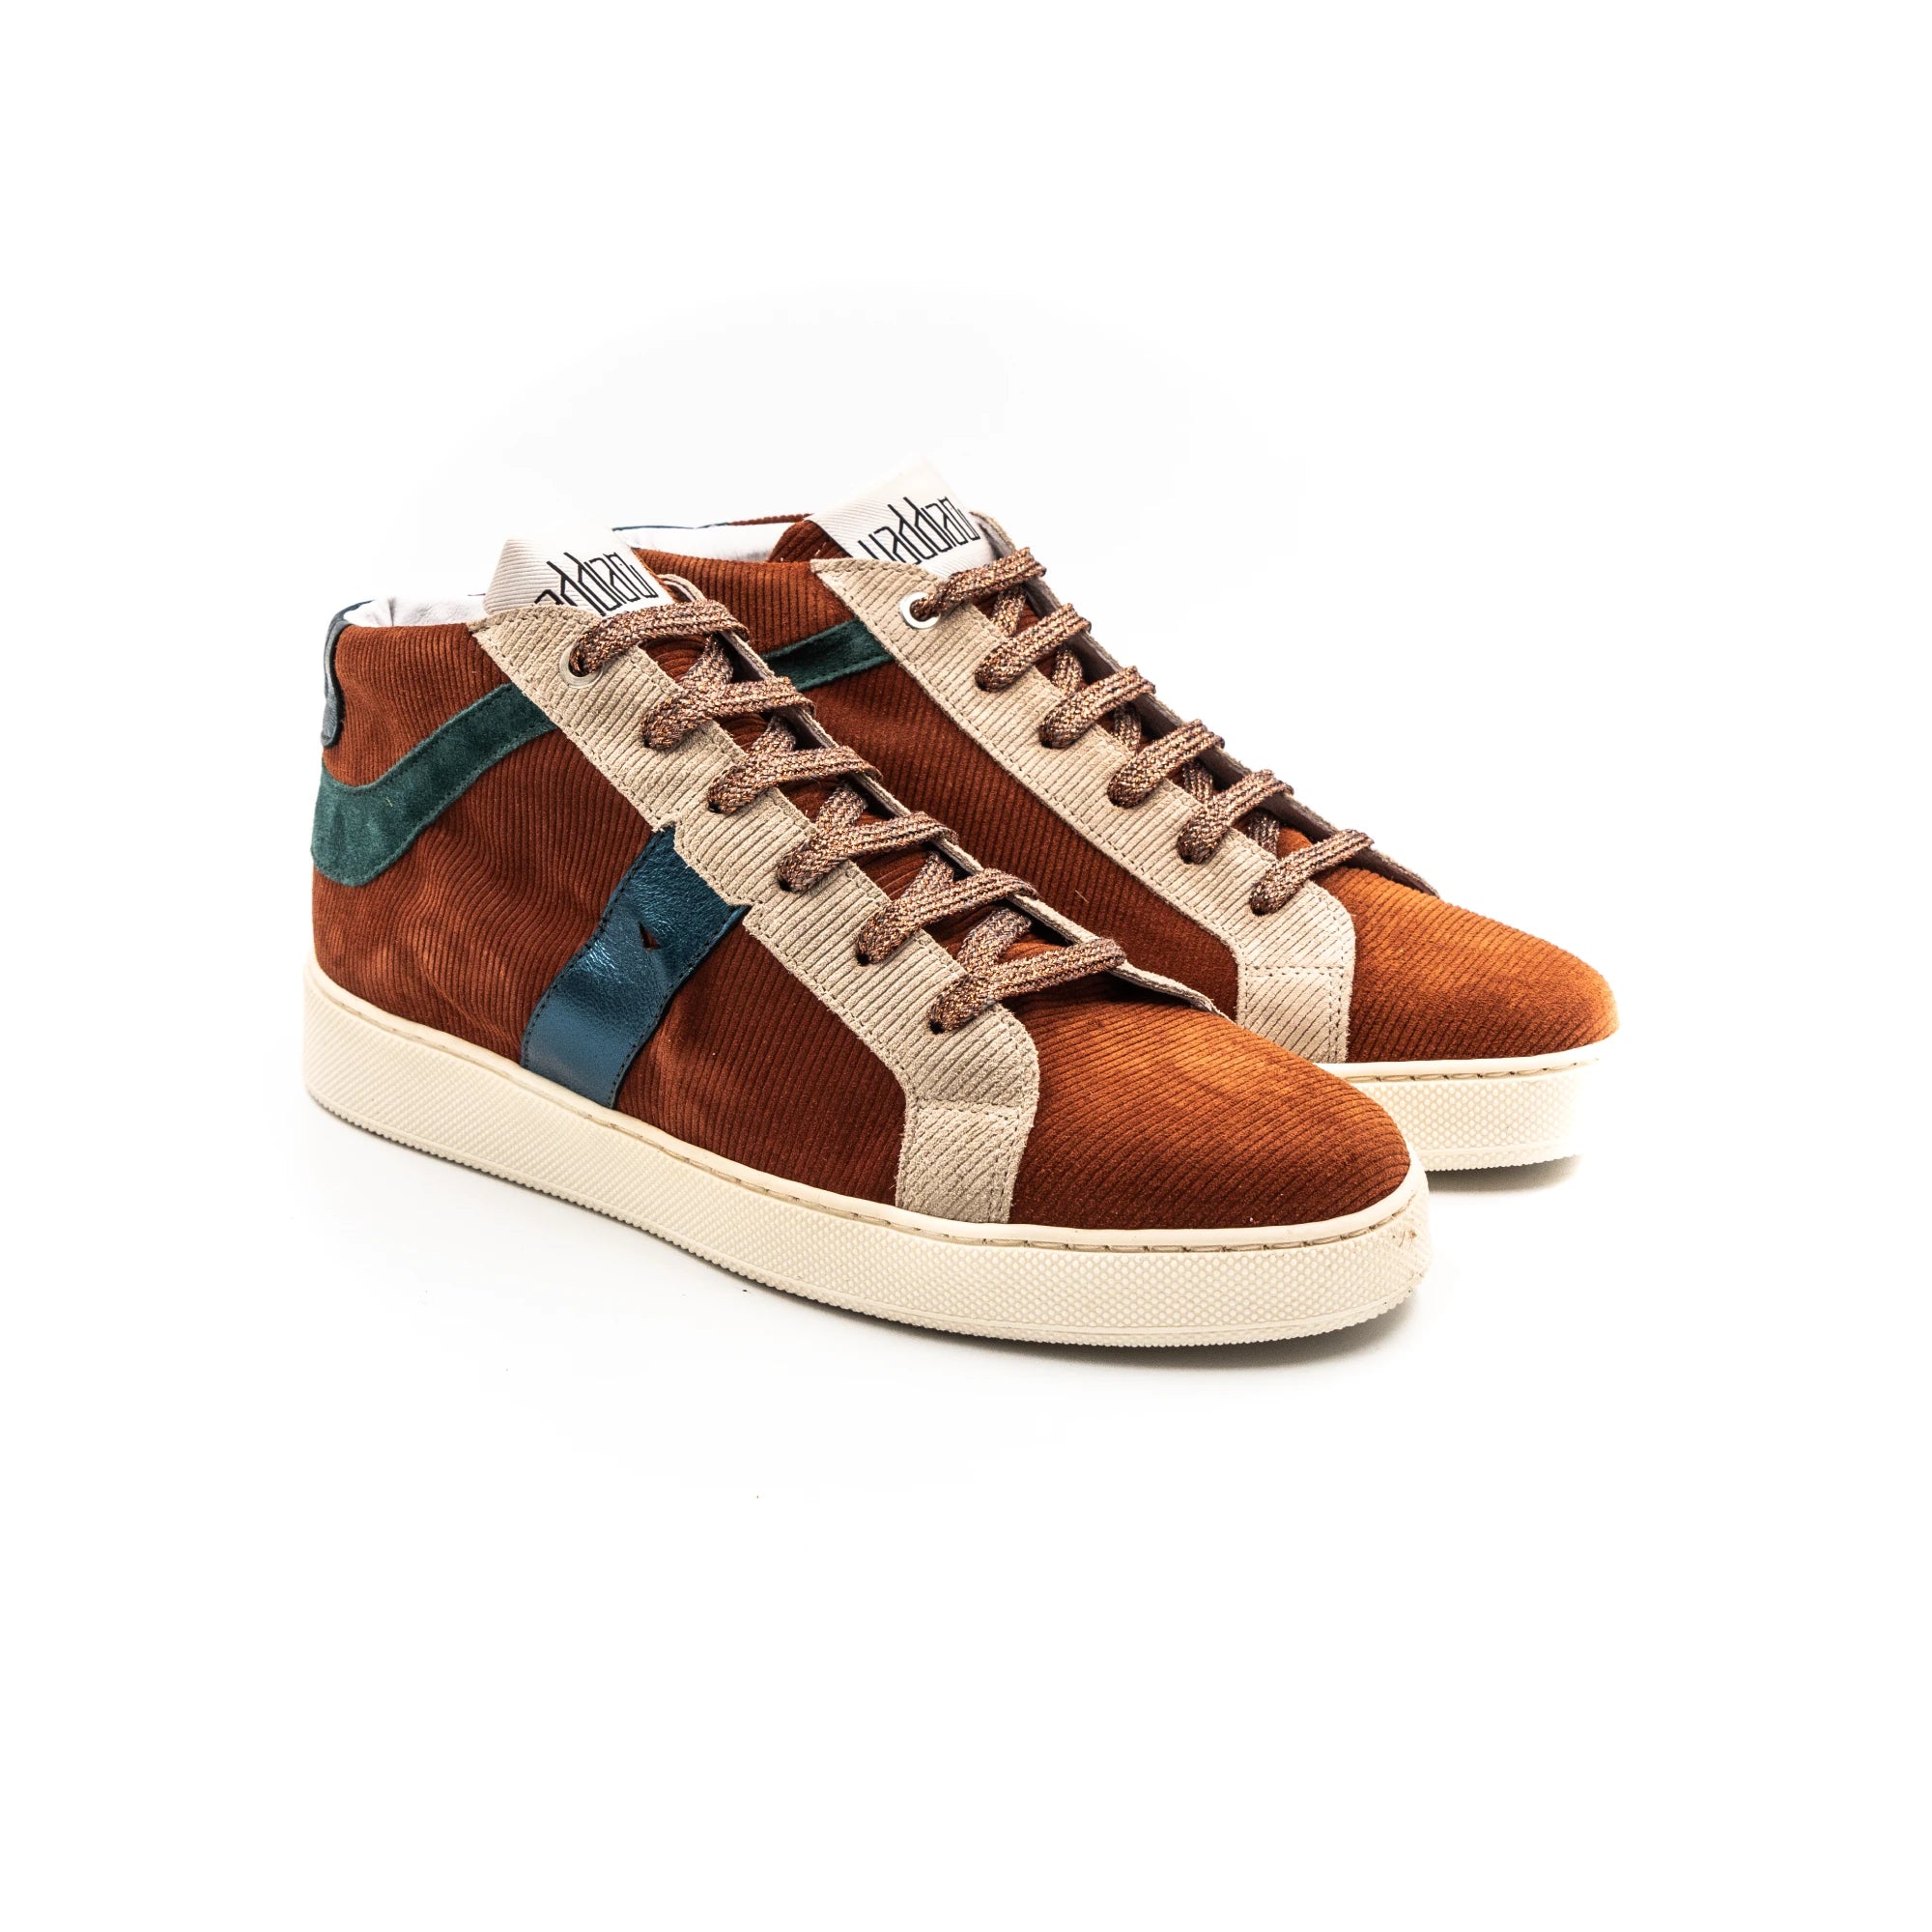 Orange high-top sneakers with blue and beige accents.